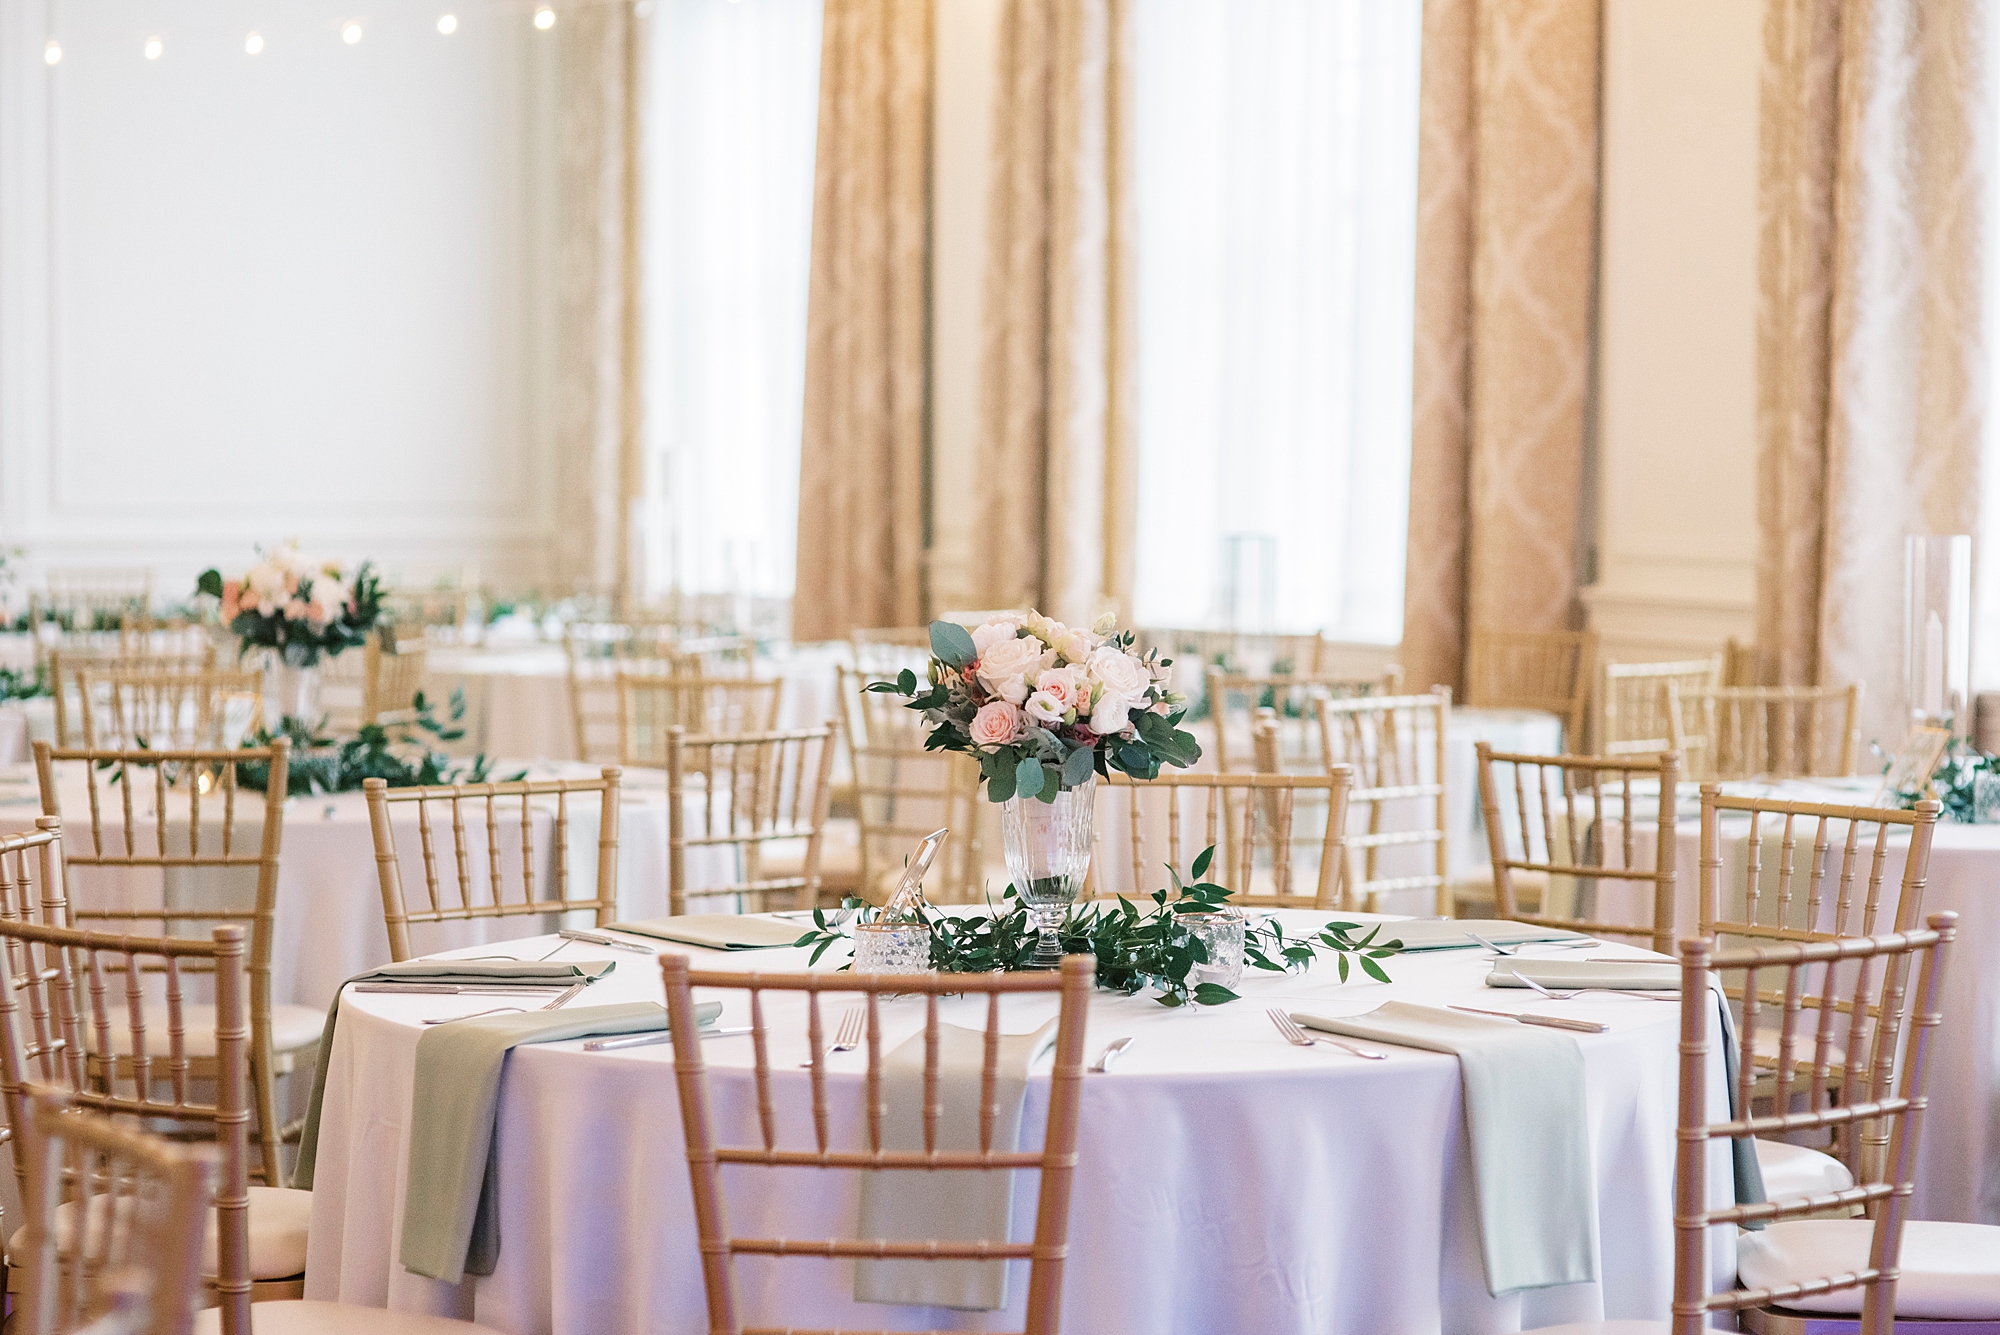 Hotel Concord wedding with gold chivari chairs